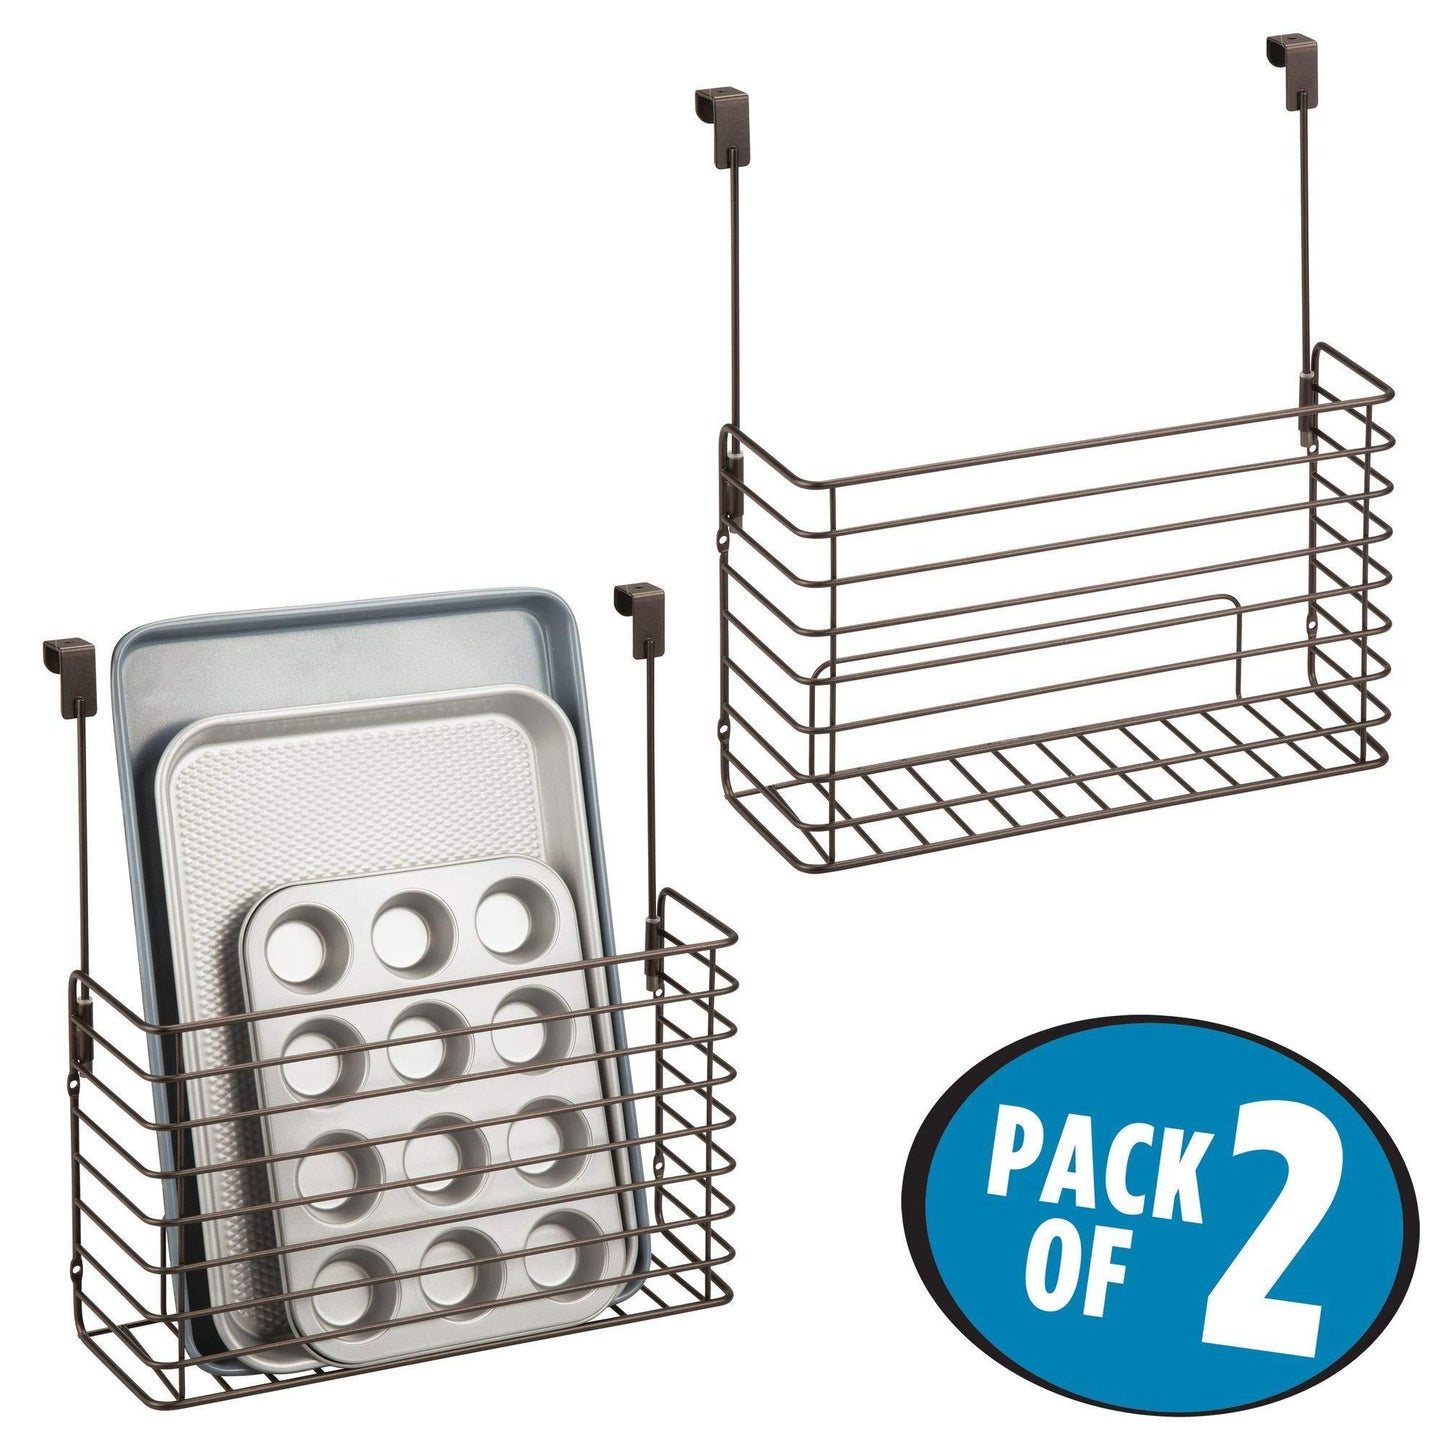 Buy now metal over cabinet kitchen storage organizer holder or basket hang over cabinet doors in kitchen pantry holds bakeware cookbook cleaning supplies 2 pack steel wire in bronze